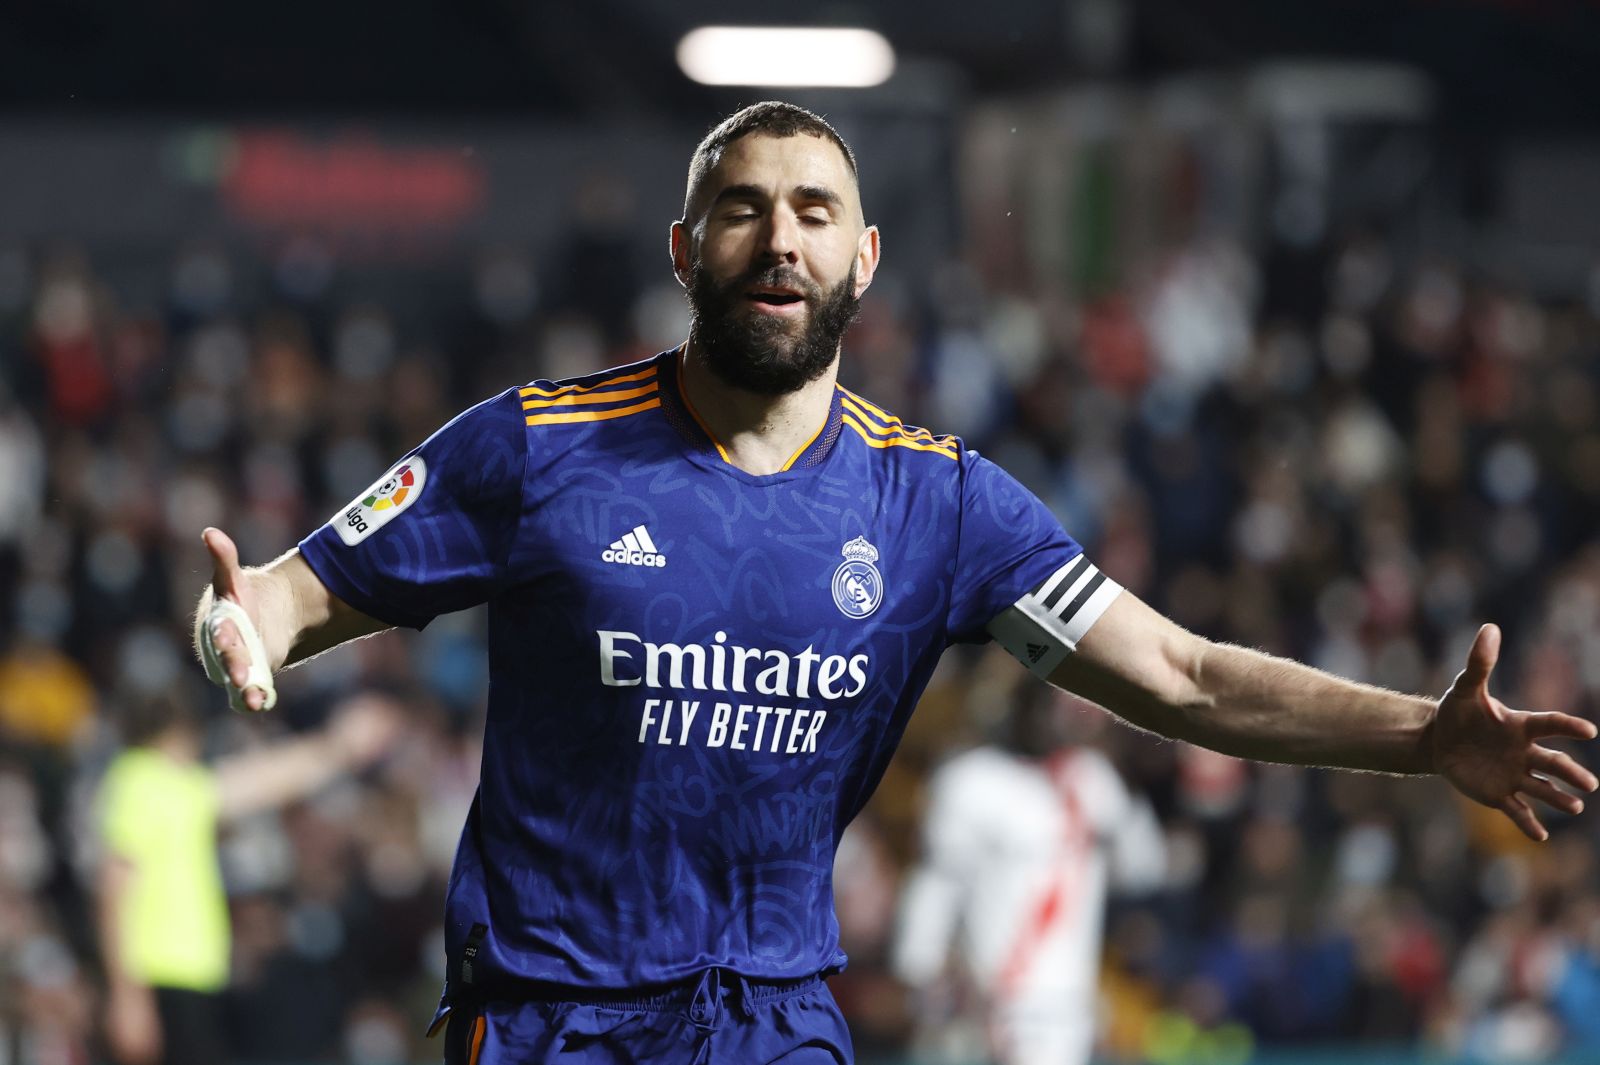 epa09787645 Real Madrid's Karim Benzema celebrates after scoring the 1-0 lead during the Spanish LaLiga soccer match between Rayo Vallecano and Real Madrid in Madrid, Spain, 26 February 2022.  EPA/Chema Moya